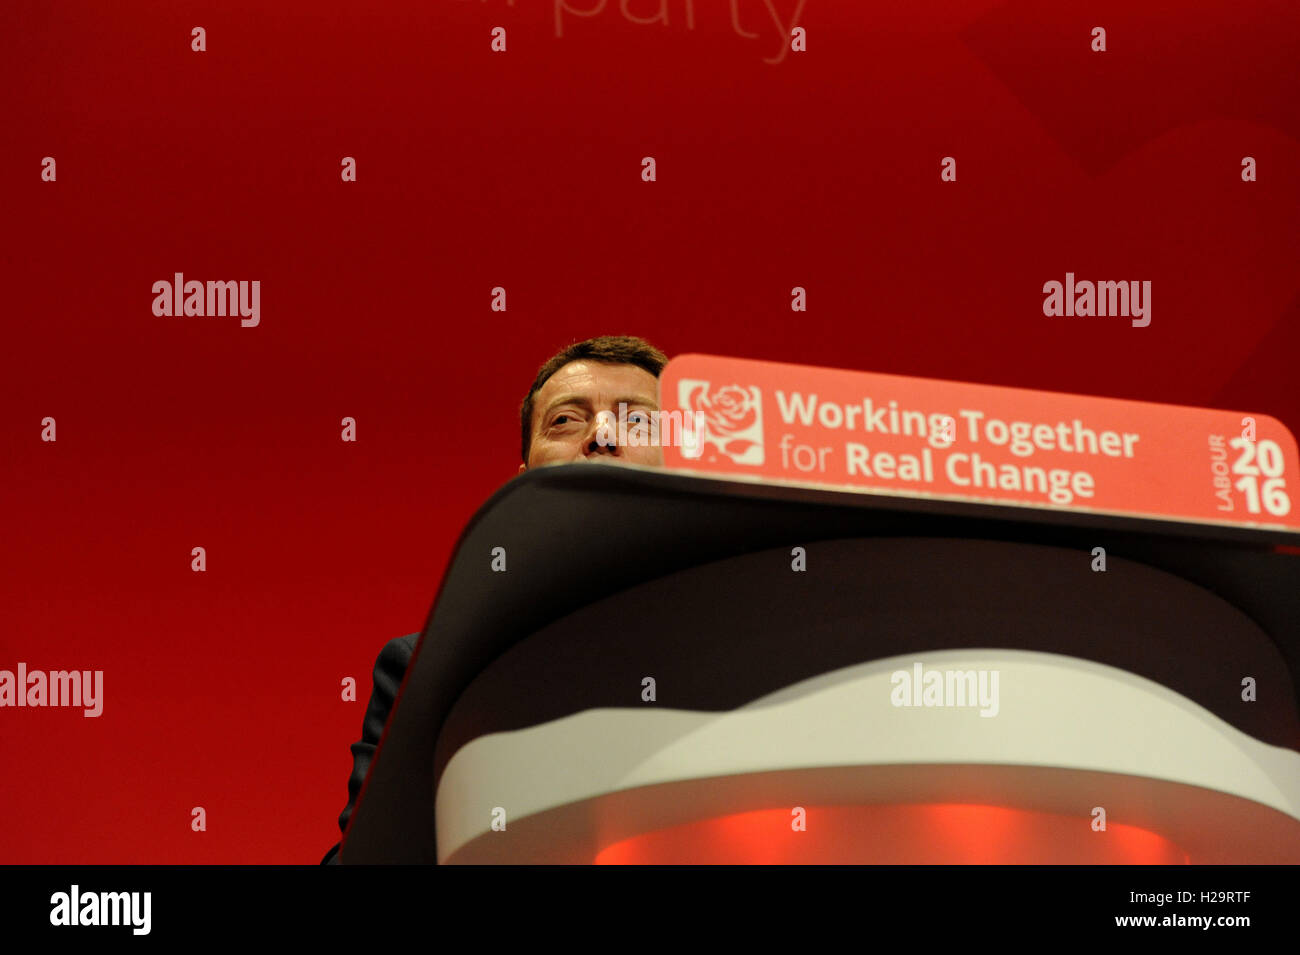 Liverpool, England. 25th September, 2016.  Ian McNicol, general secretary, delivers his report during the first day of the Labour Party annual conference at the ACC Conference Centre. On the morning of the first day of the conference there will be reports from the general secretary, the national policy forum and on digital and party organisation. This conference is following Jeremy CorbynÕs re-election as labour party leader after nine weeks of campaigning against fellow candidate, Owen Smith. This is his second leadership victory in just over twelve months and was initiated by the decision of Stock Photo